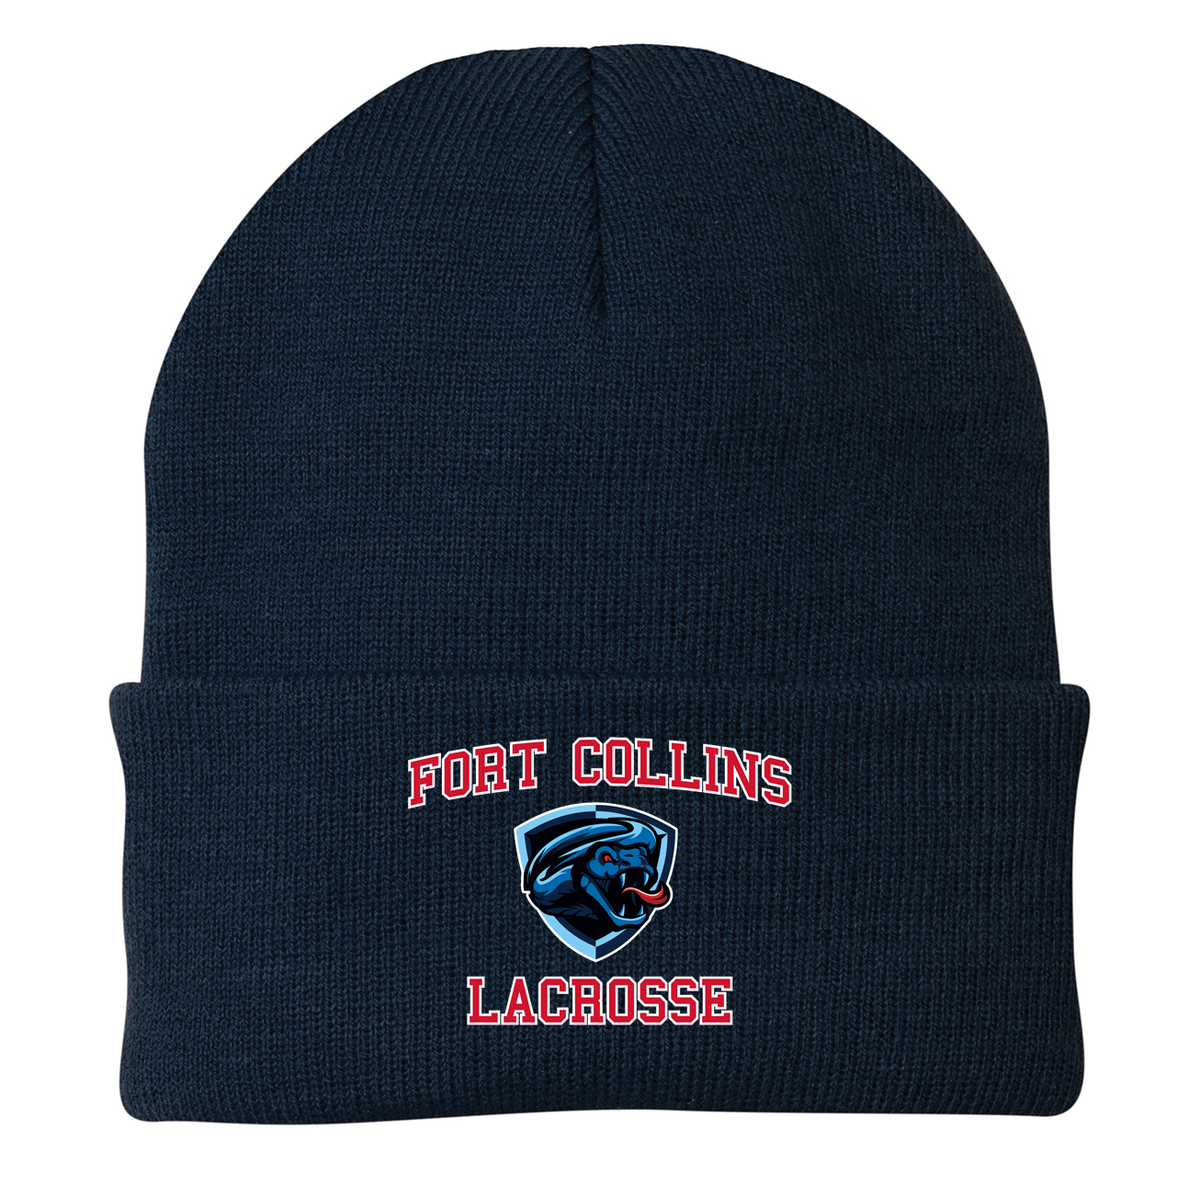 Fort Collins Lacrosse  Knit Beanie